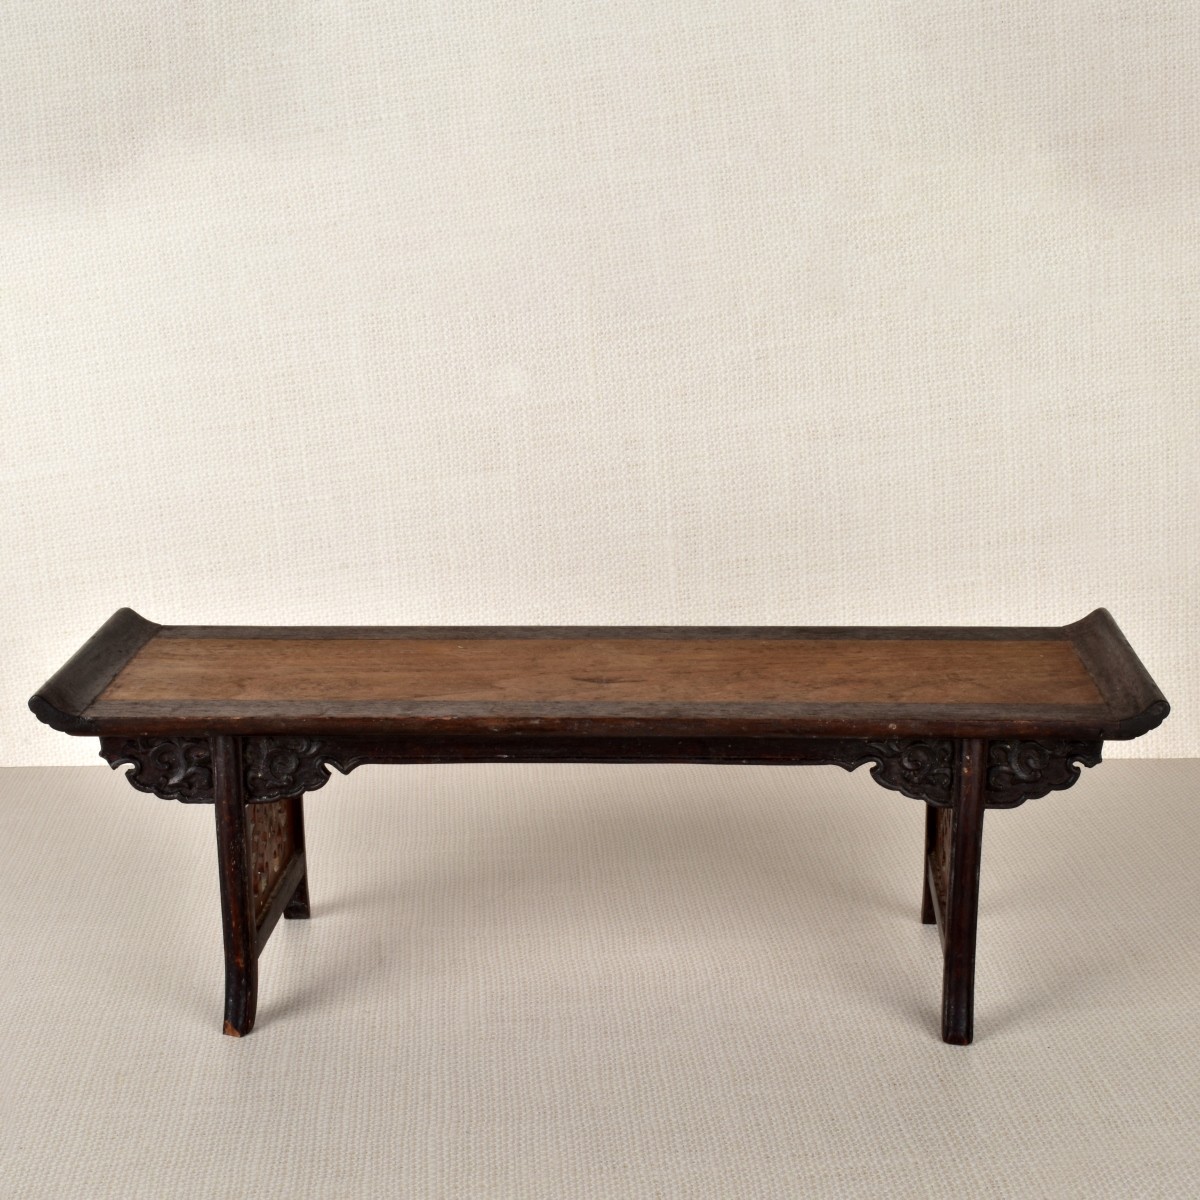 Chinese Mini Altar Table